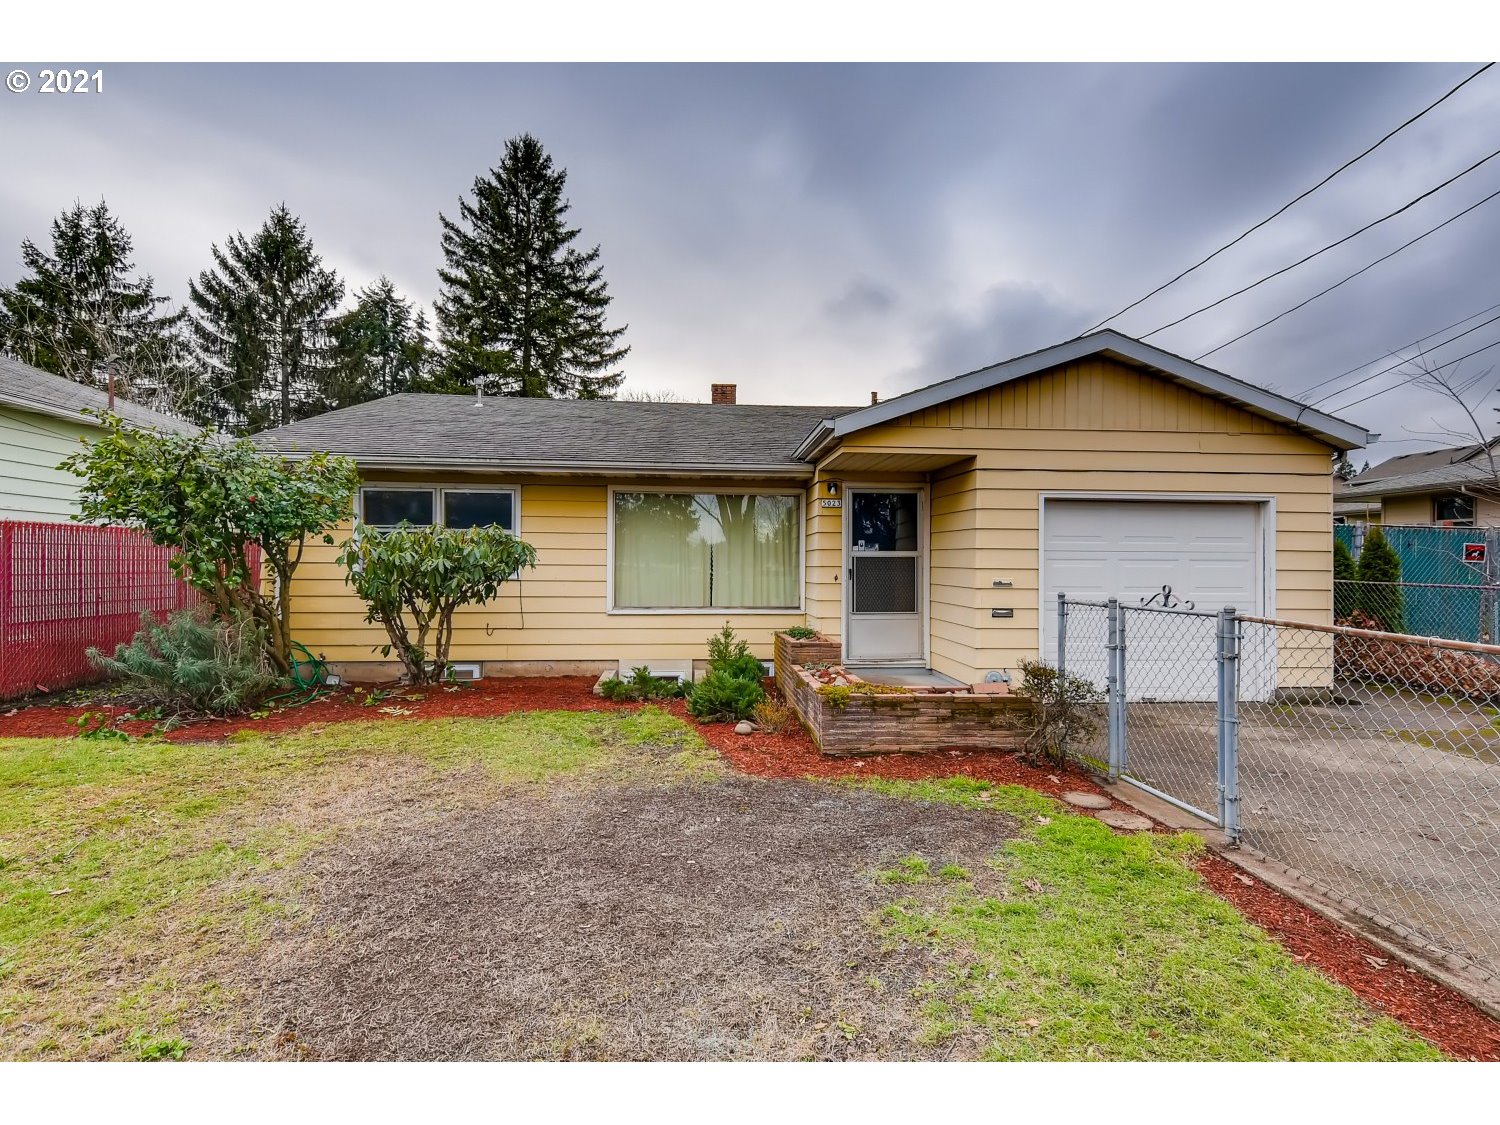 5023 SE 100TH AVE (1 of 23)